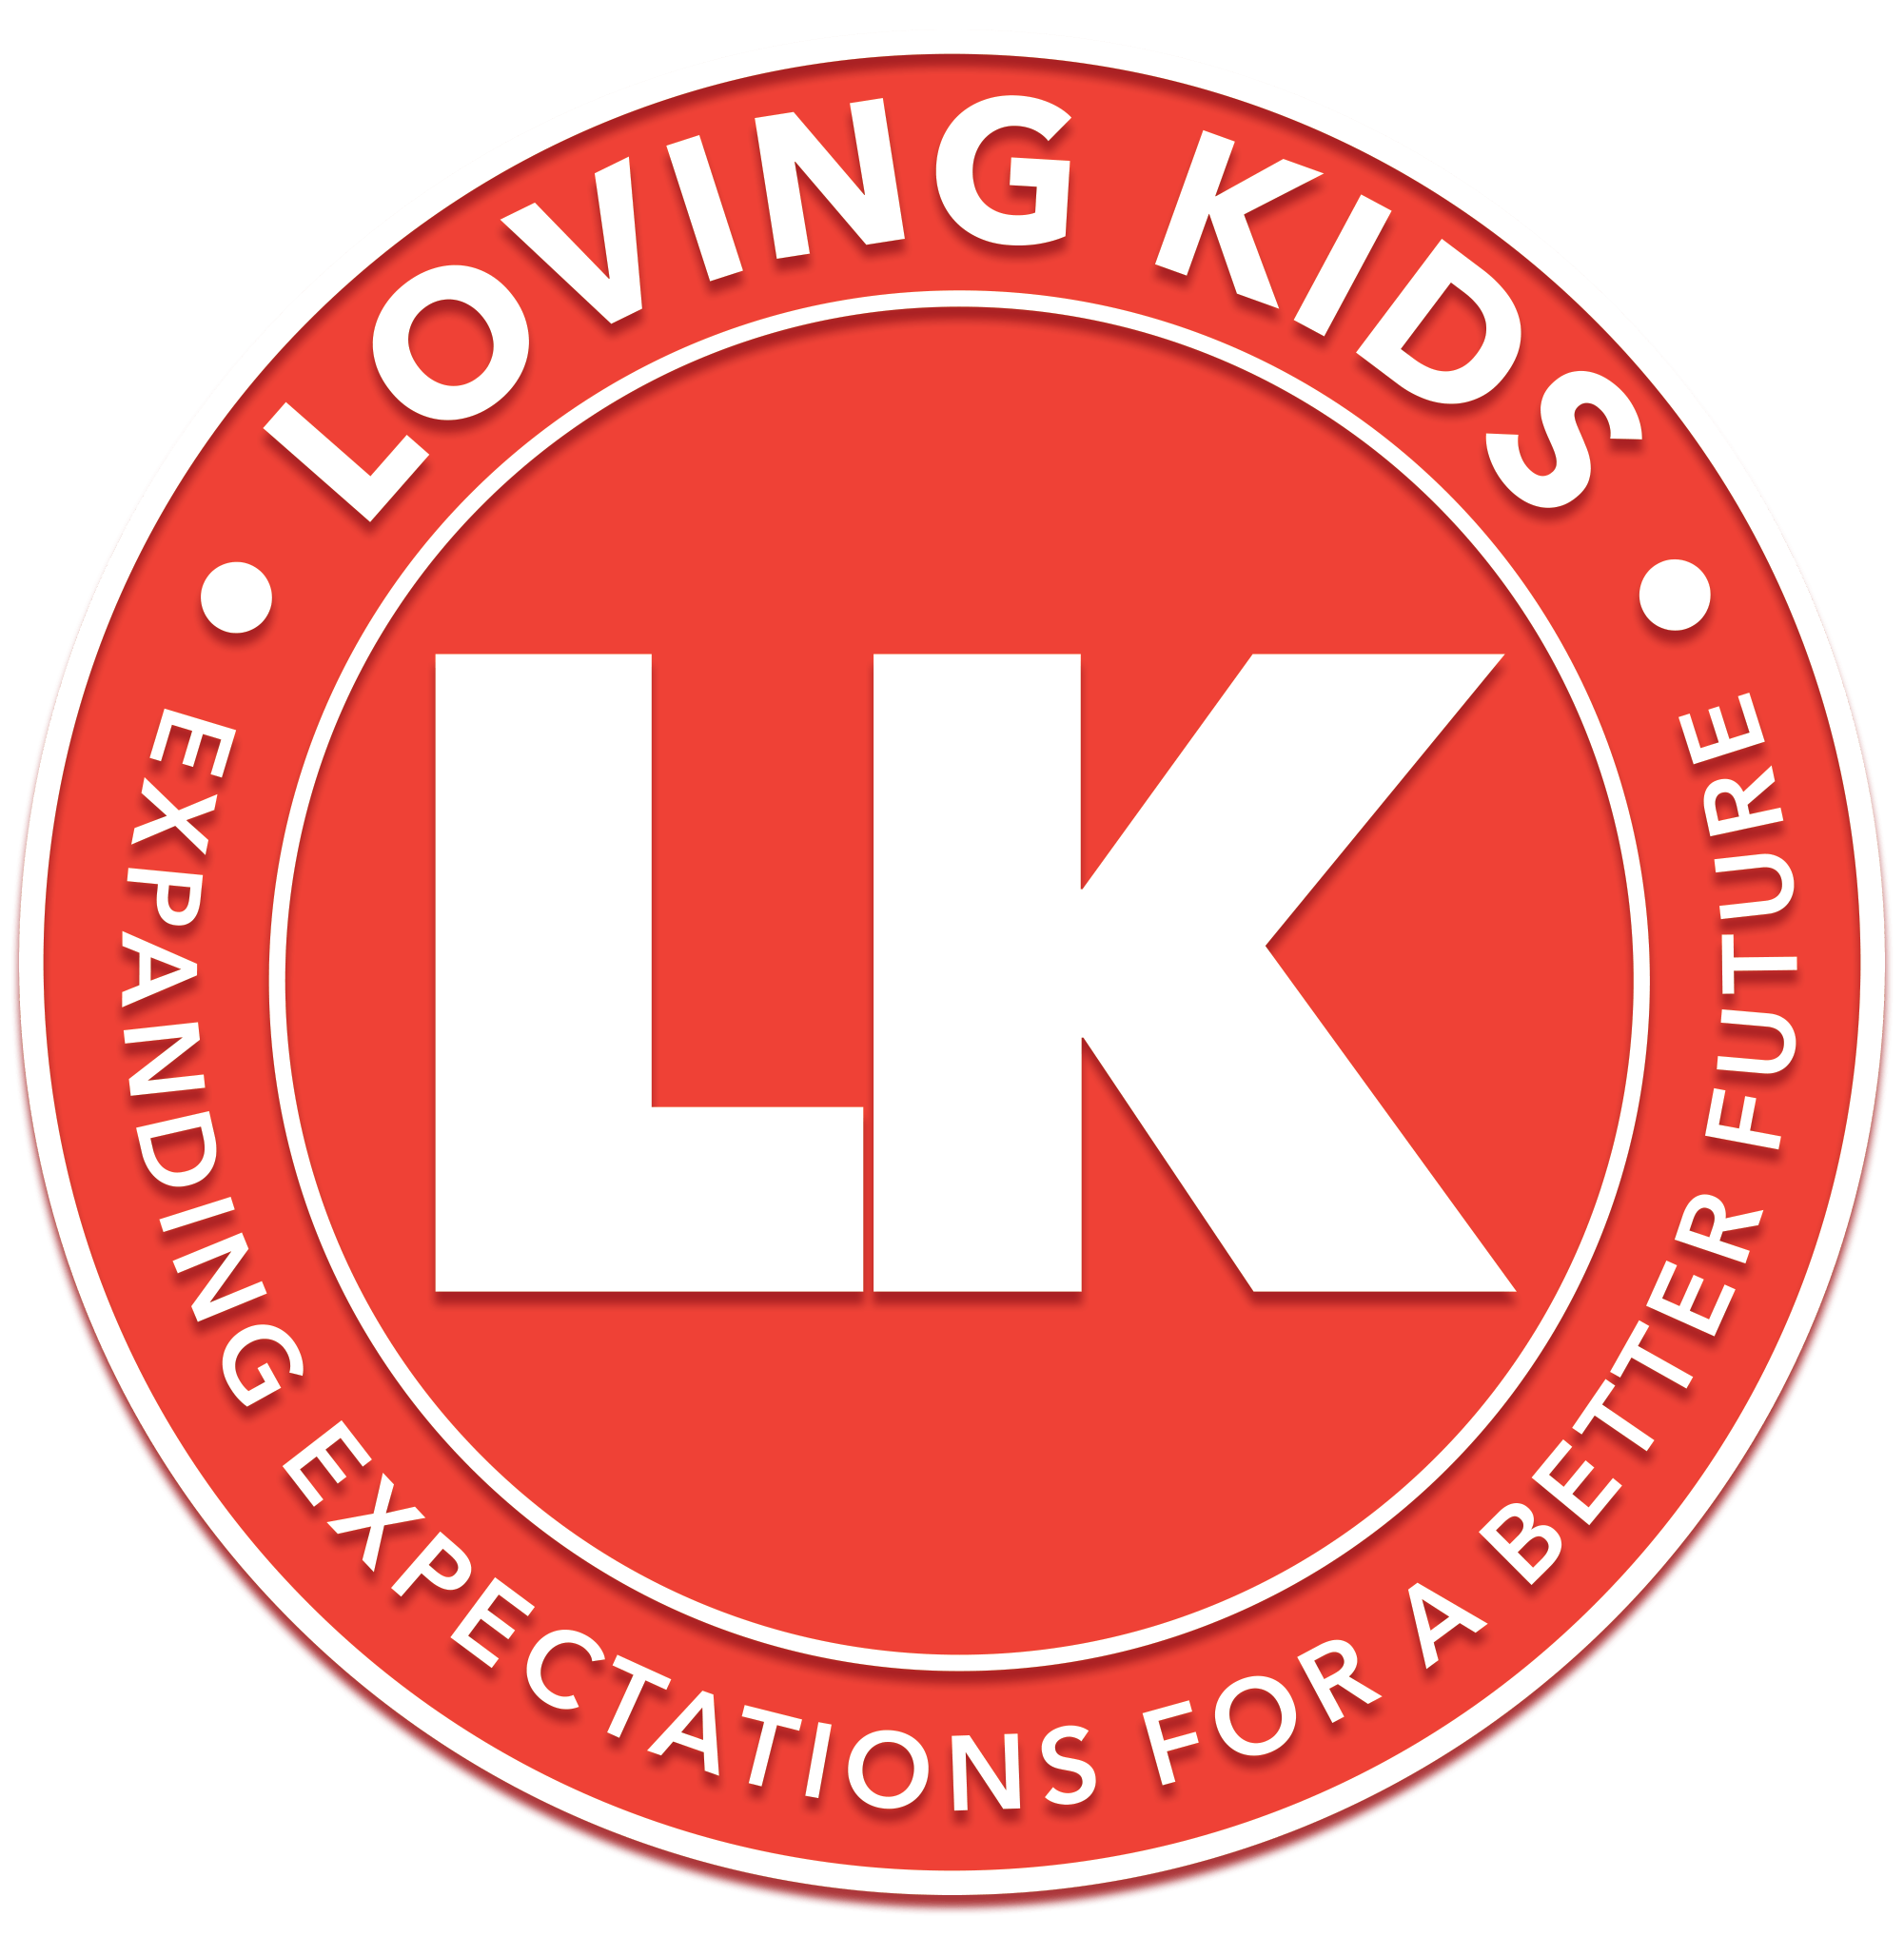 Loving Kids • Expanding Expectations for a Better Future